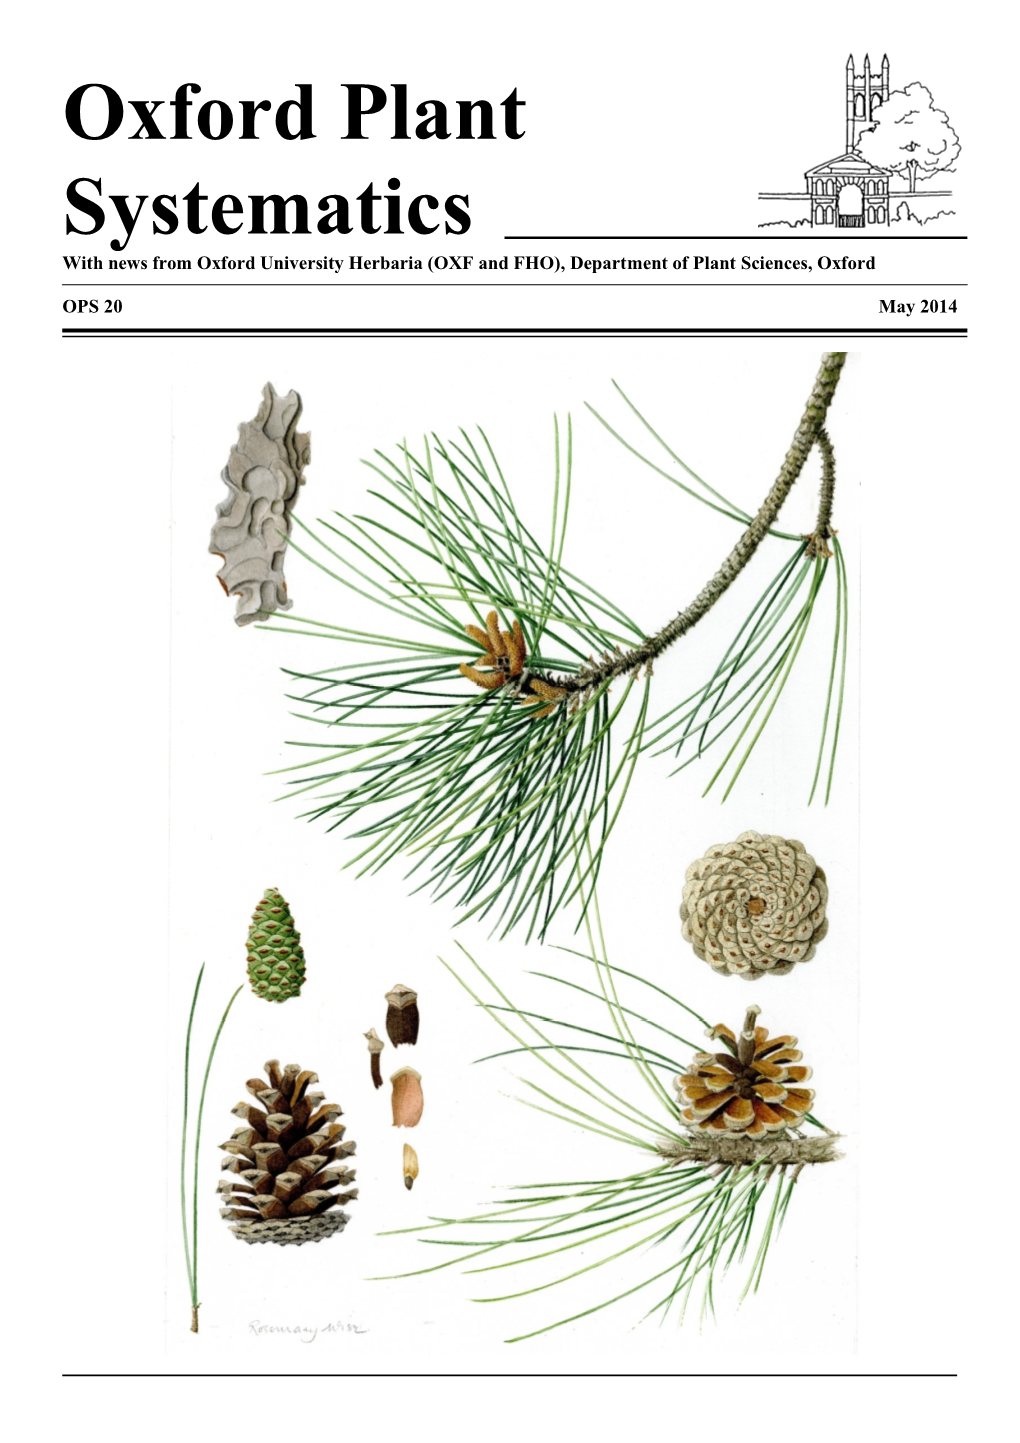 Oxford Plant Systematics Newsletter OPS 20